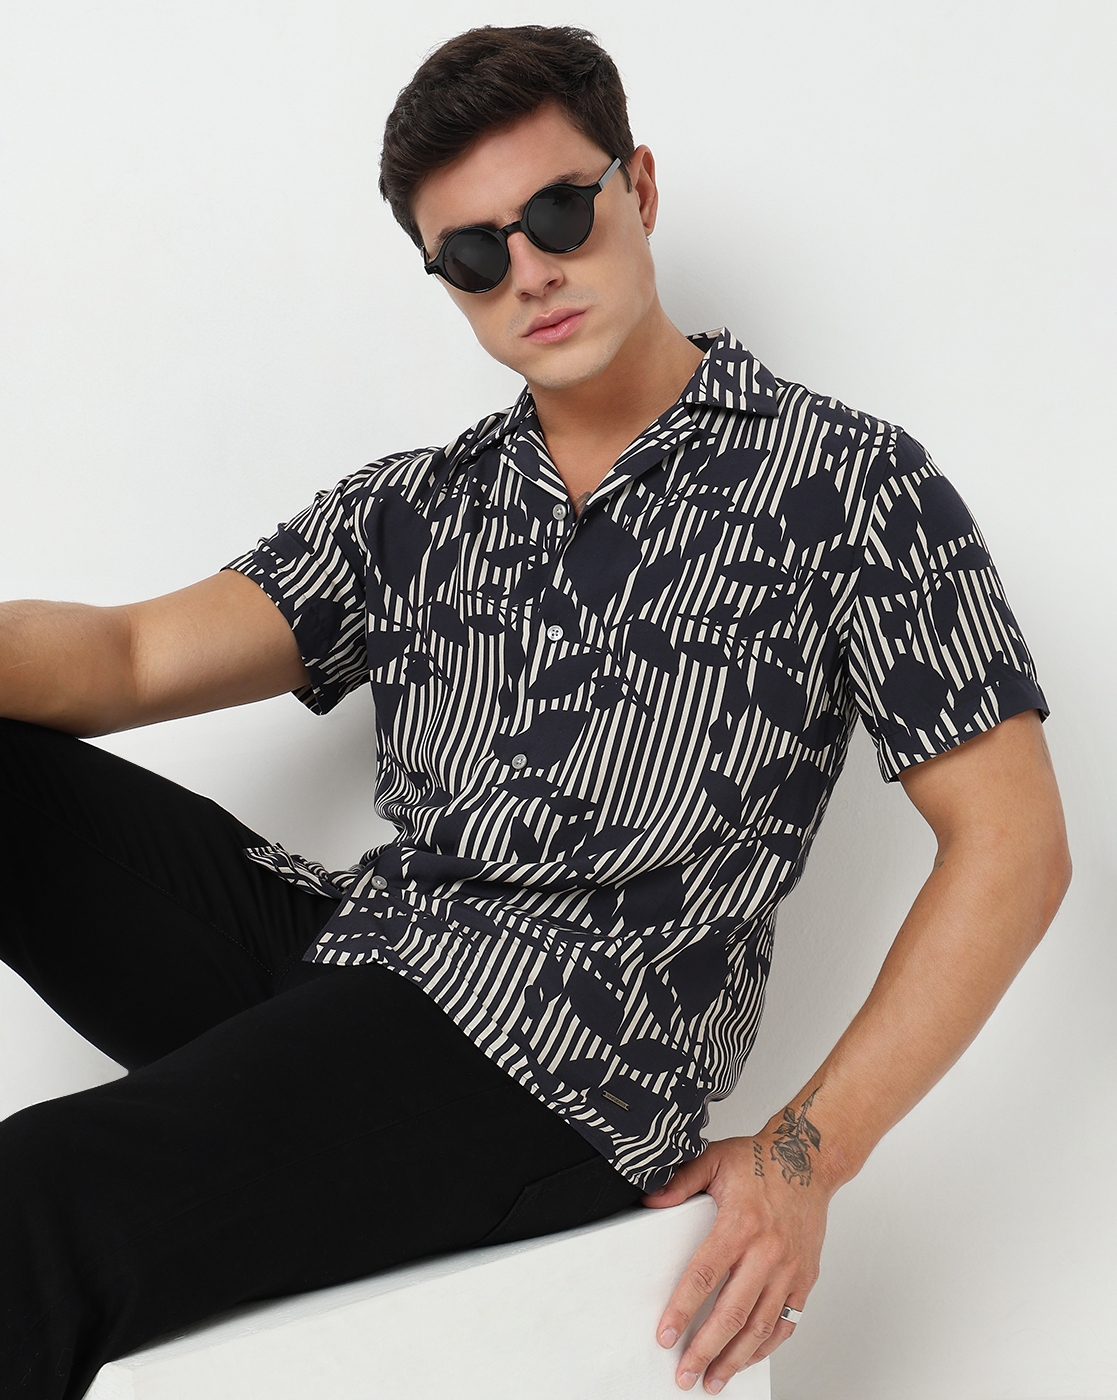 Regular Fit All Over Printed Short Sleeve Shirt with Resort Collar